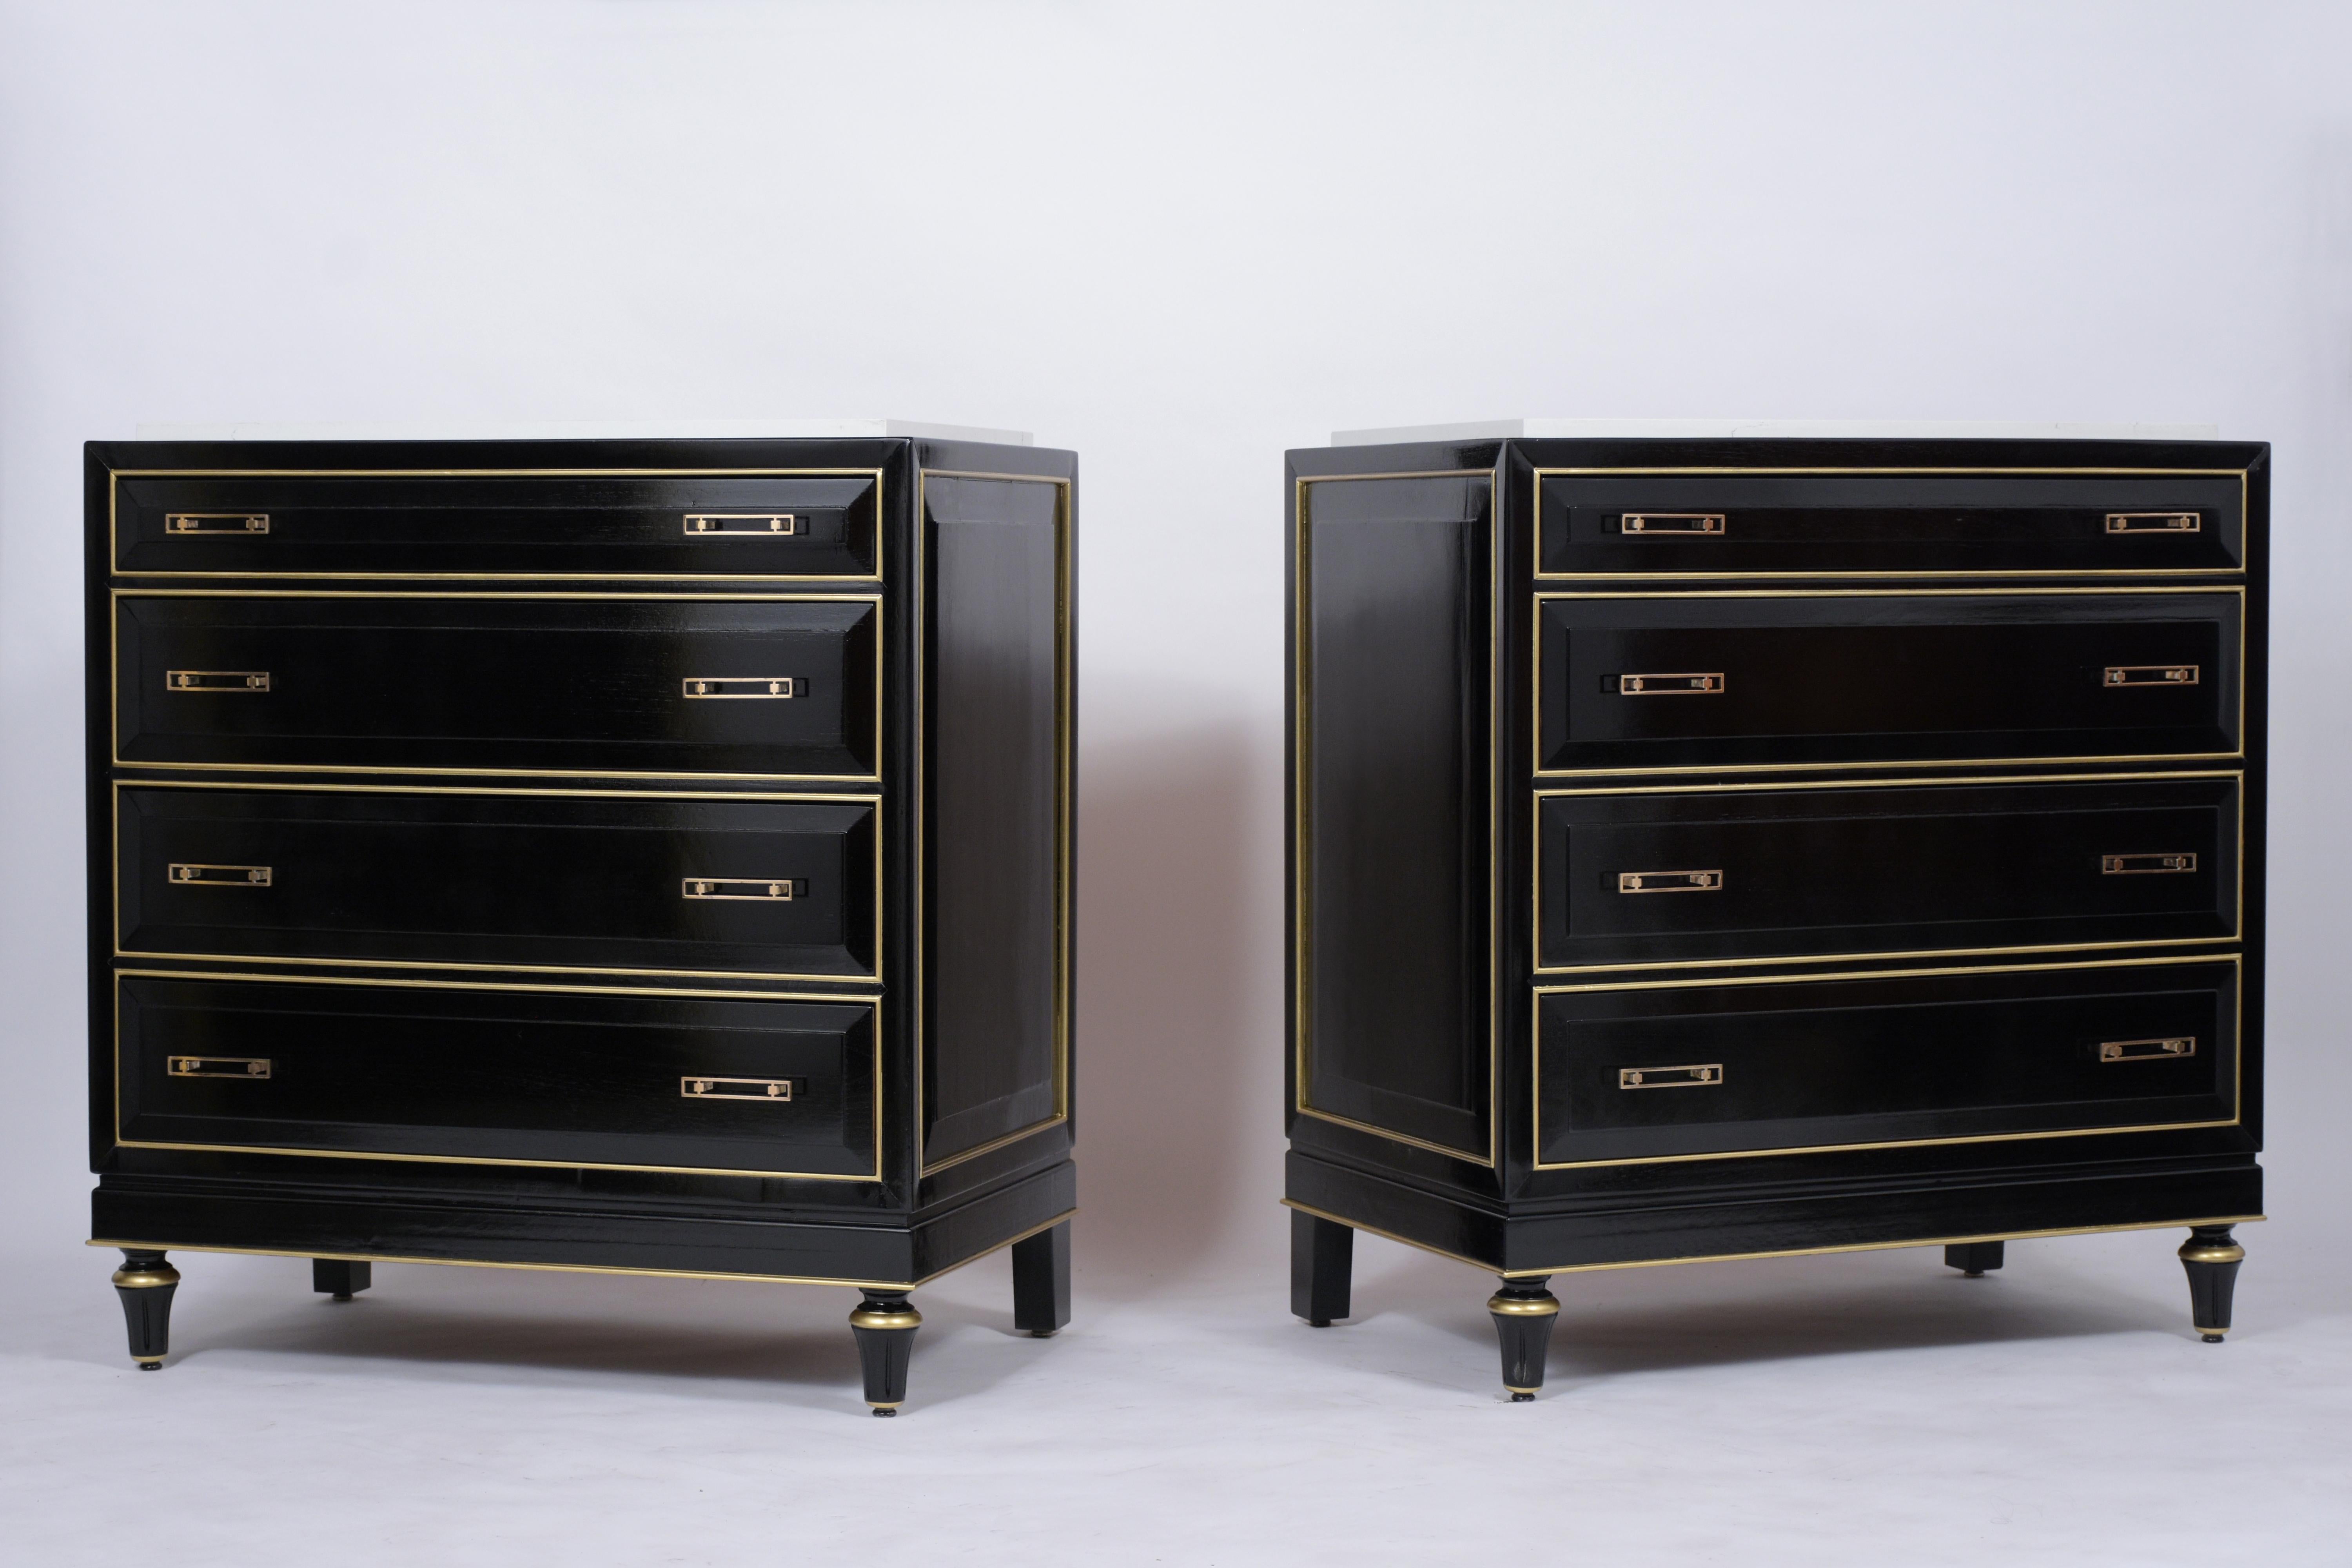 A fabulous pair of Louis XVI style chest of drawers which is handcrafted out of mahogany wood with a new ebonized lacquered finish and has been professionally restored. This pair of dressers features a marble top, gilt molding accents, and four